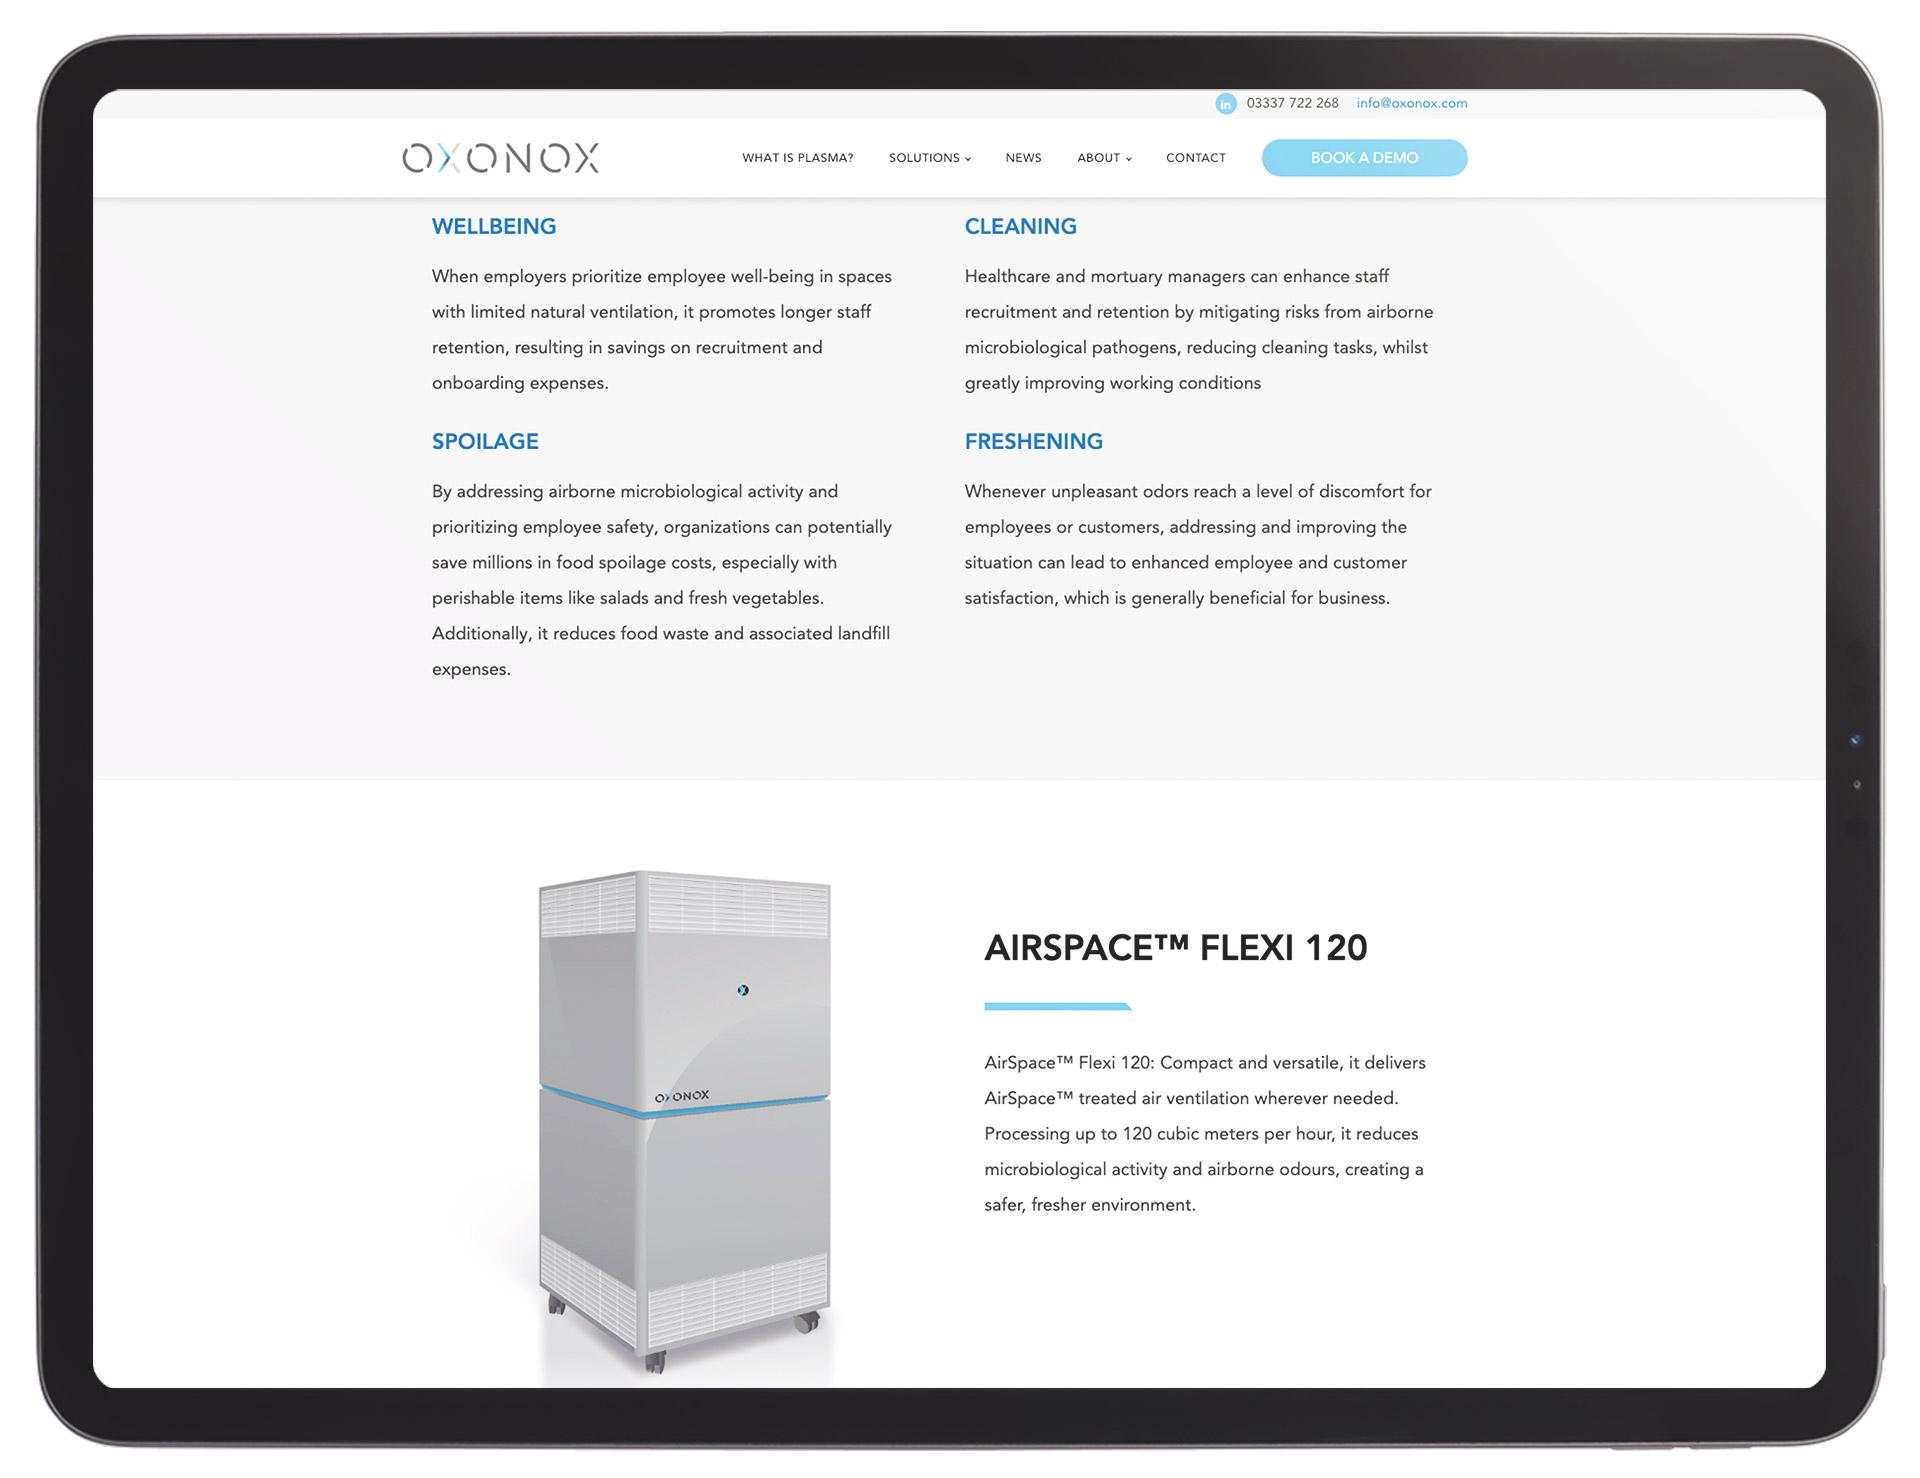 Brand website airspace product